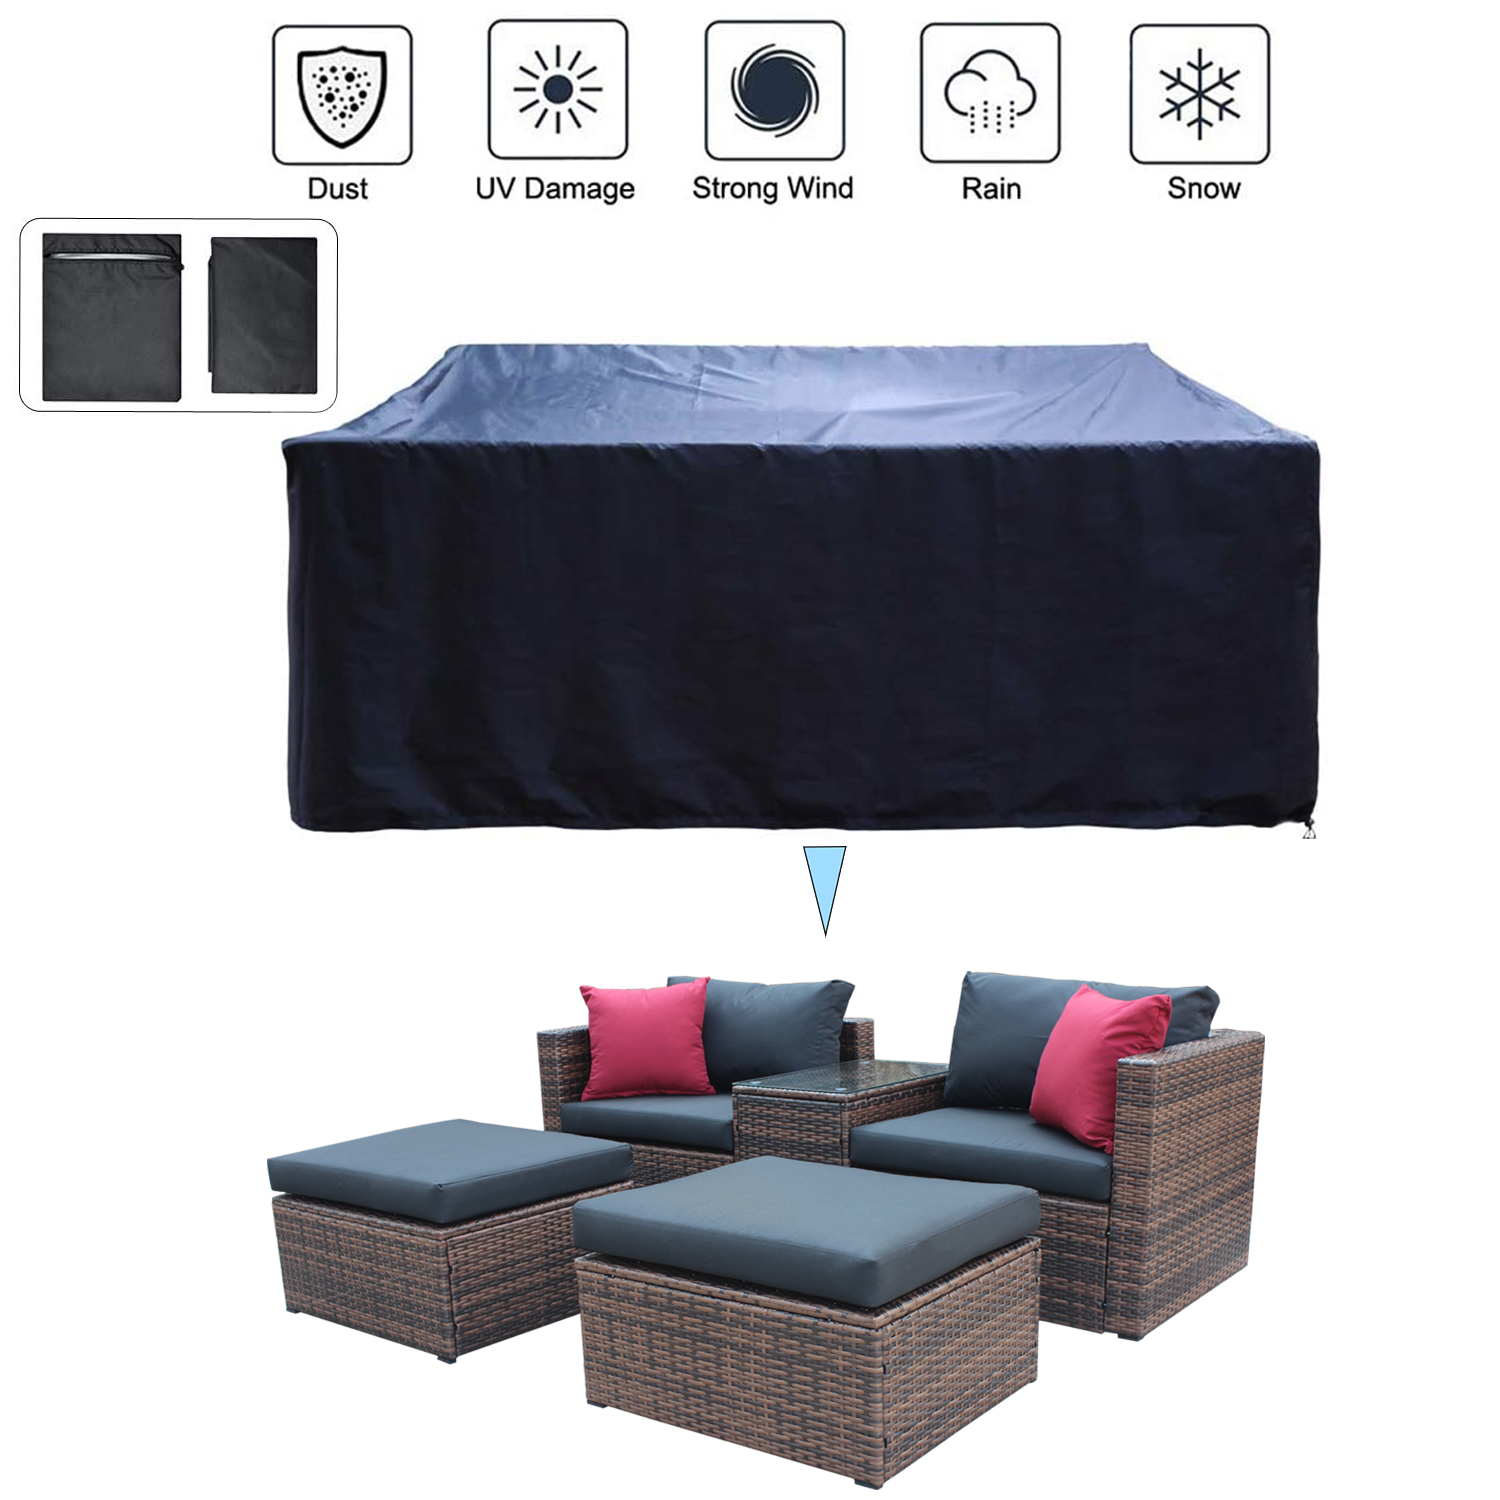 5 Pieces Outdoor Patio Sectional Sofa Set, Rattan and Black Cushion with Weather Protecting Cover, Patio Sofa Sets with 2 Rattan Chairs, 2 Pieces Patio Rattan Ottomans and Coffee Table - image 4 of 7